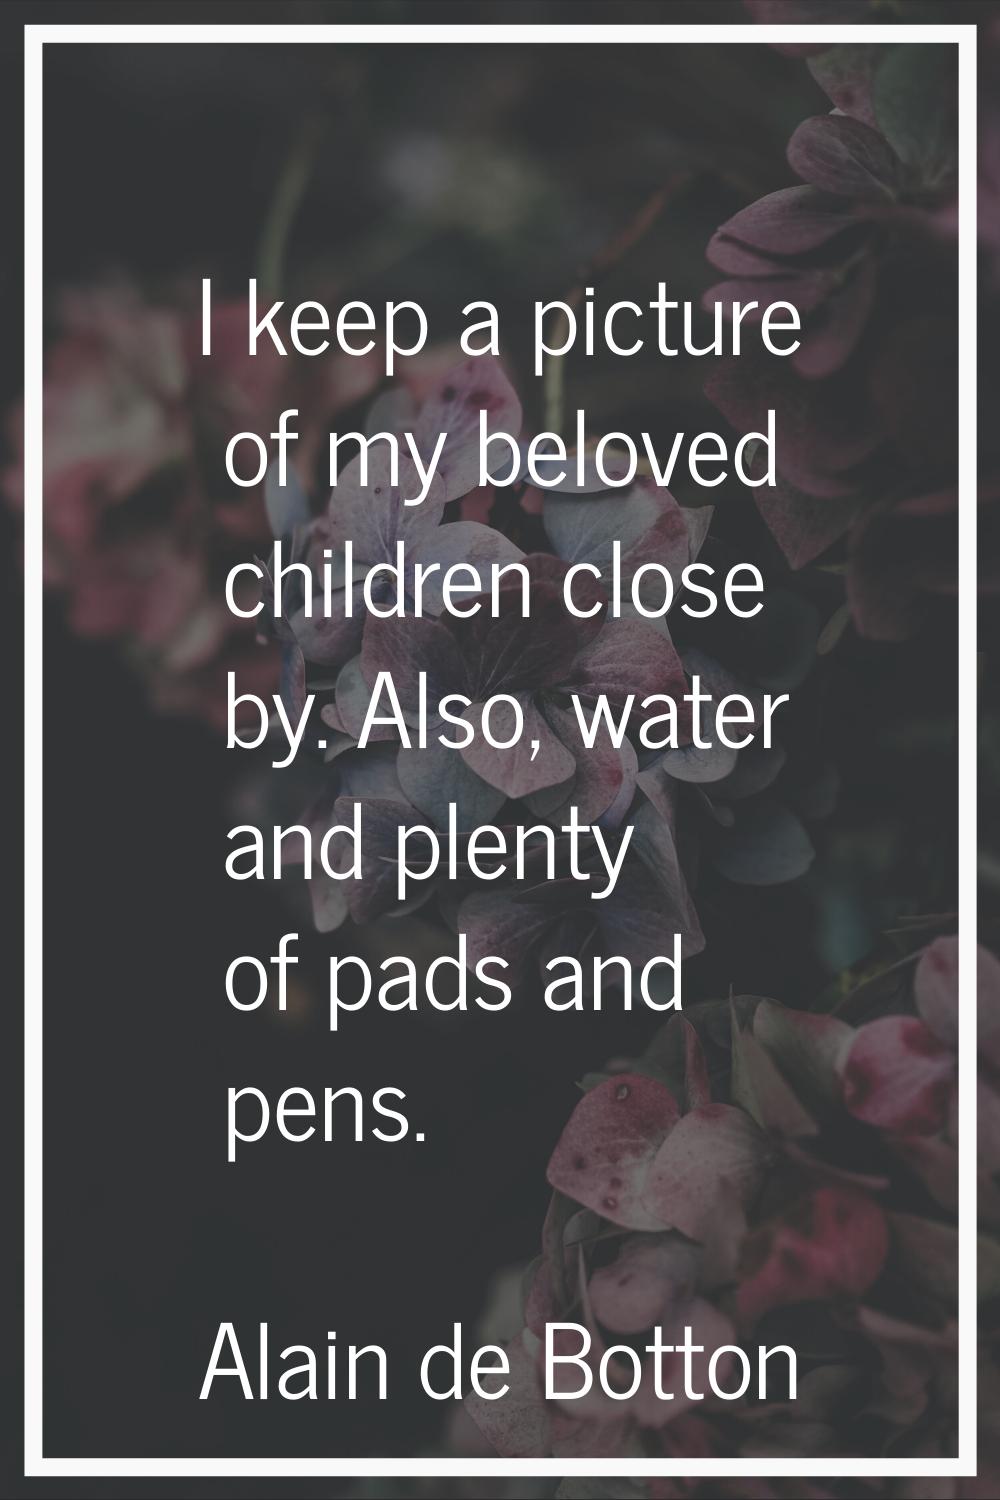 I keep a picture of my beloved children close by. Also, water and plenty of pads and pens.